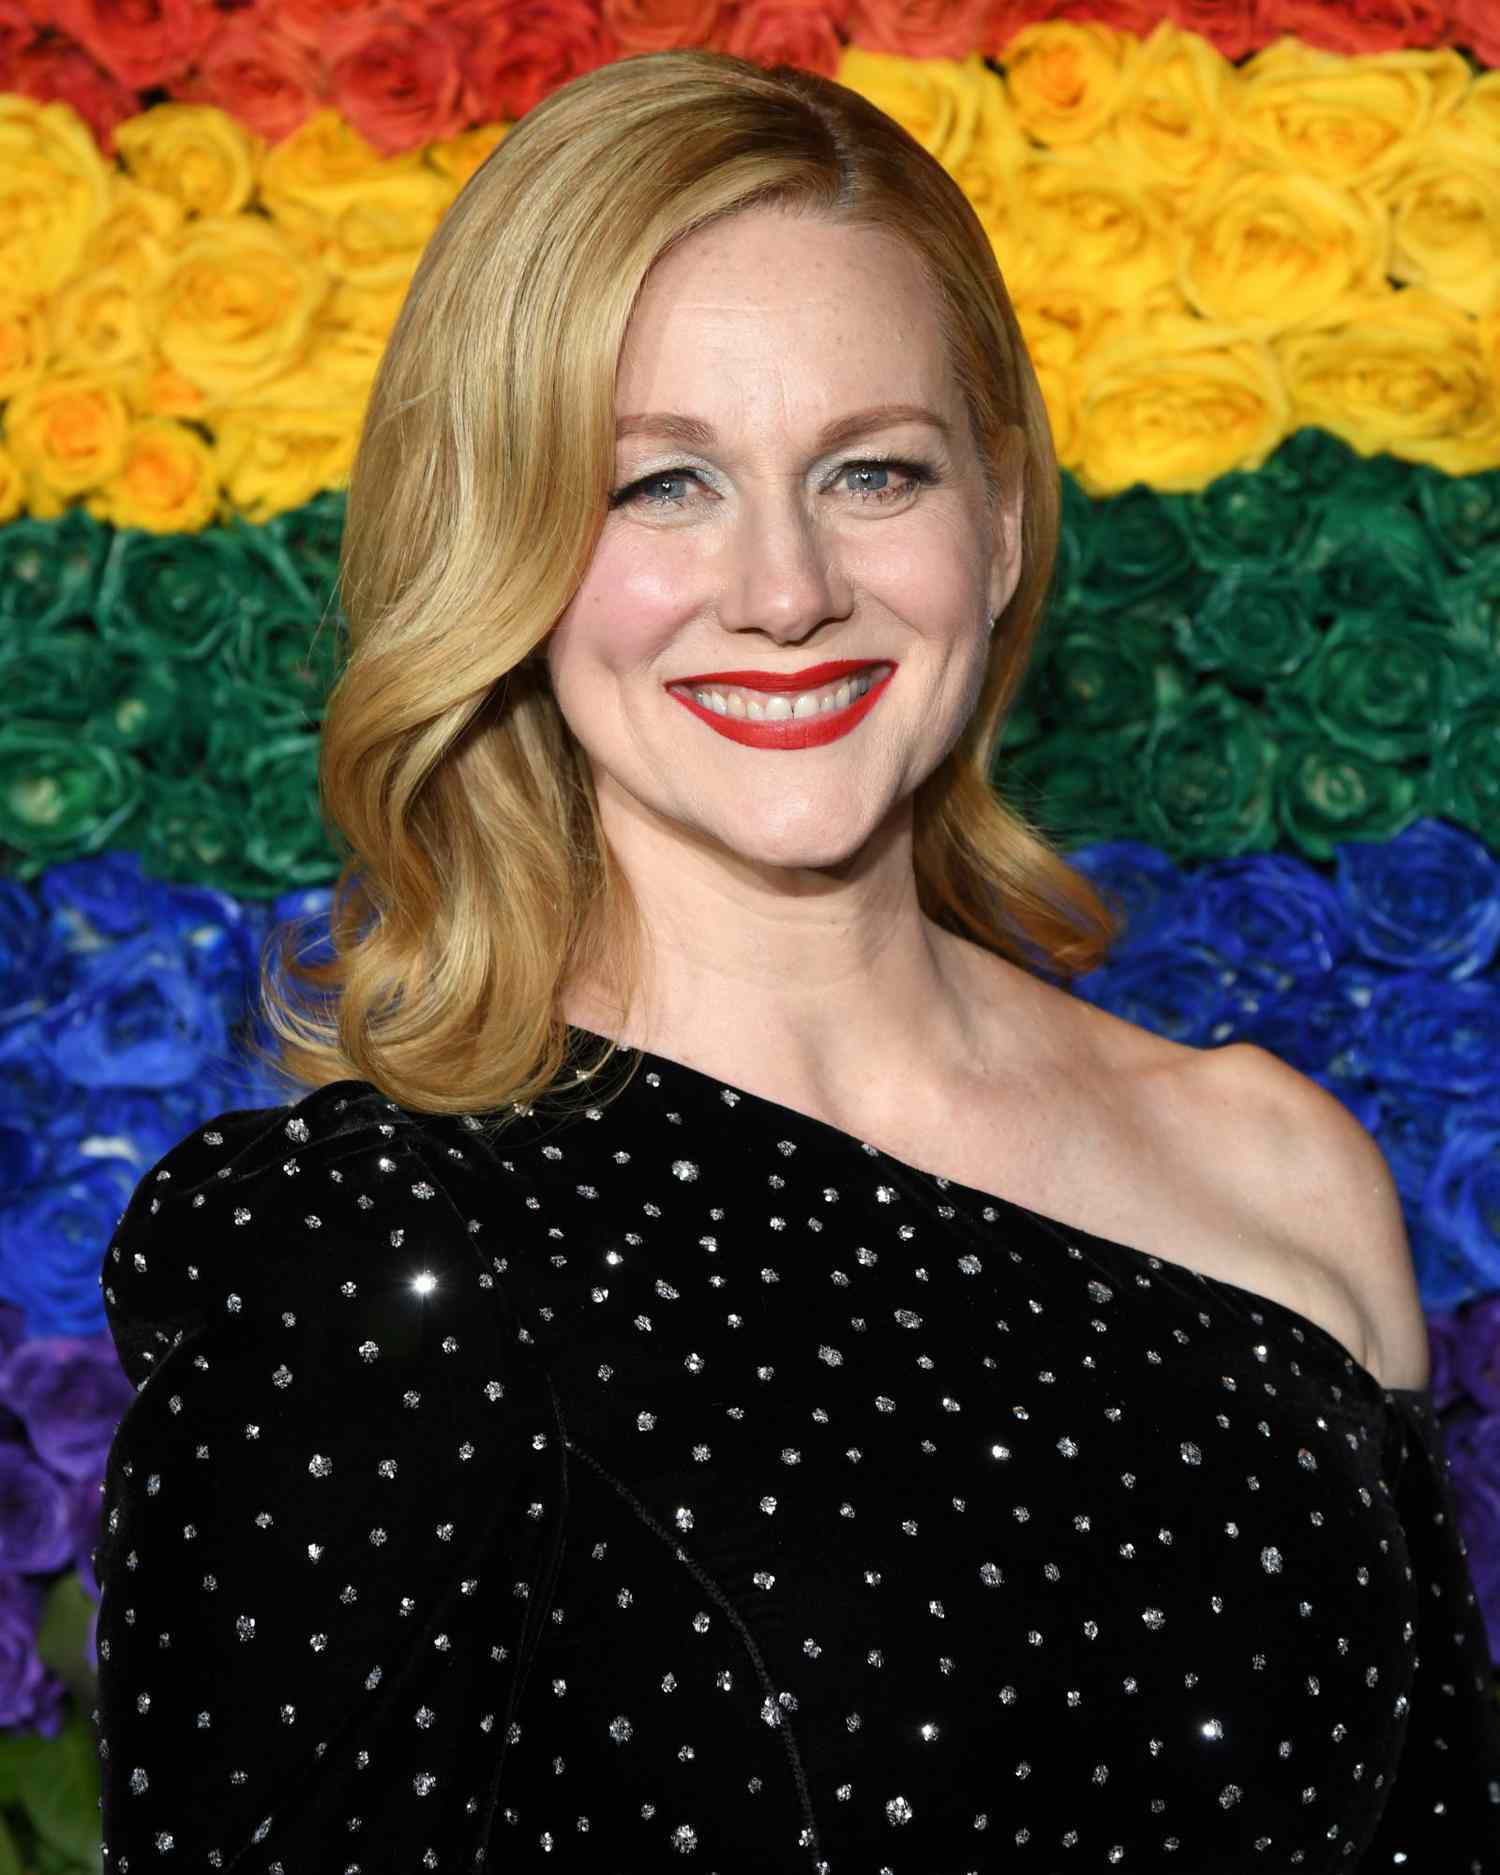 Laura pictures linney of Laura linney